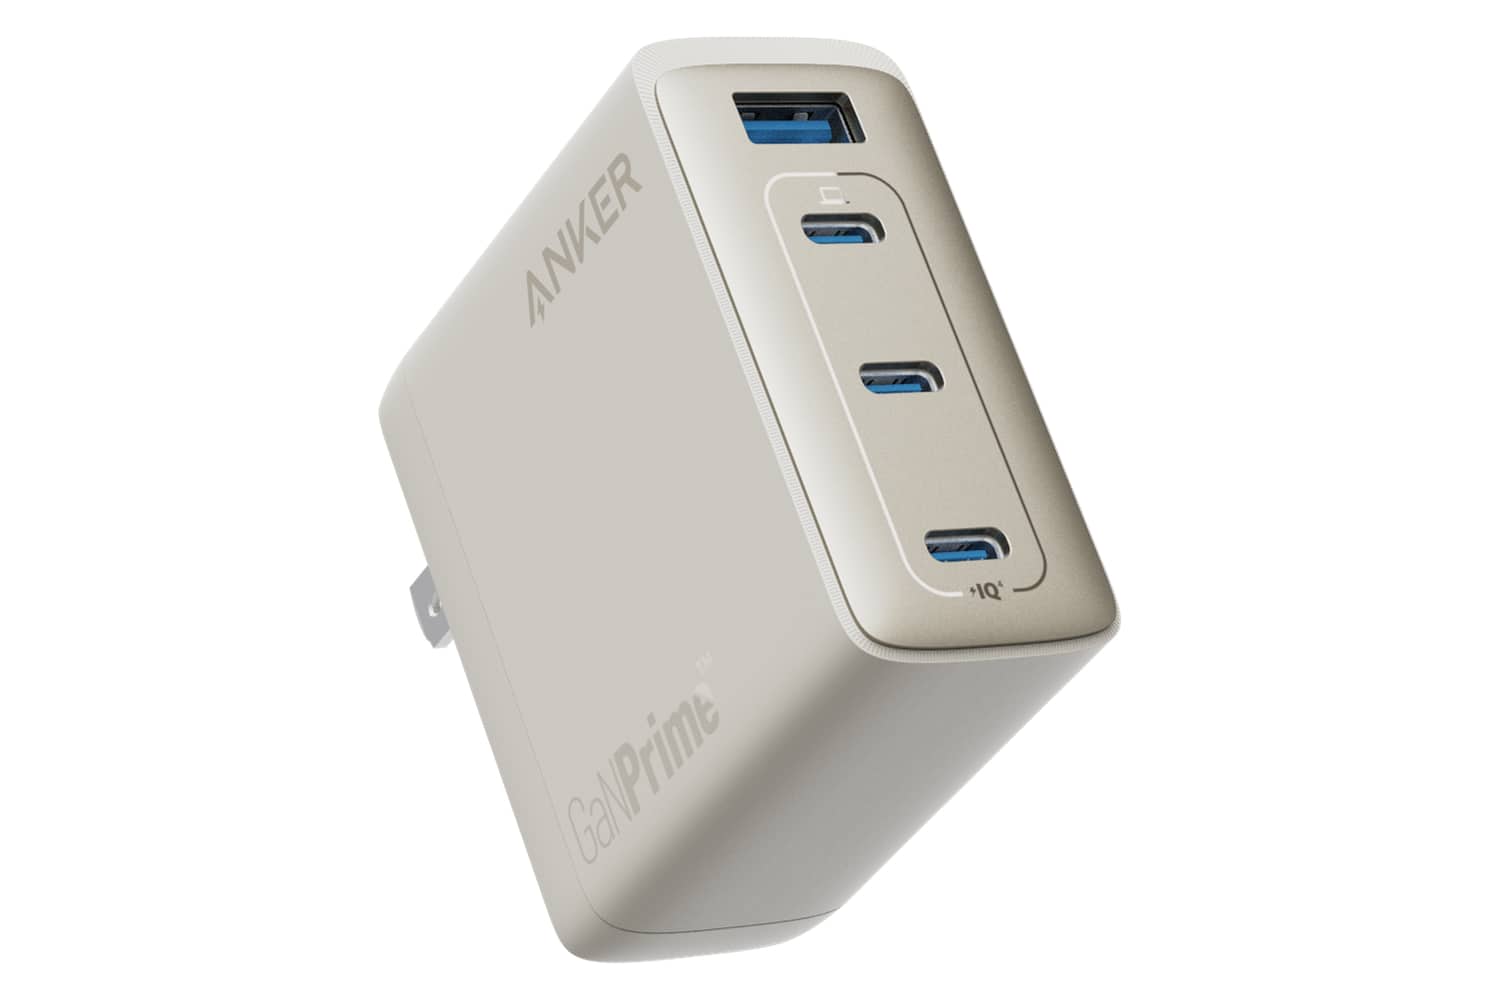 Anker's new GaN chargers offer more power in small packages